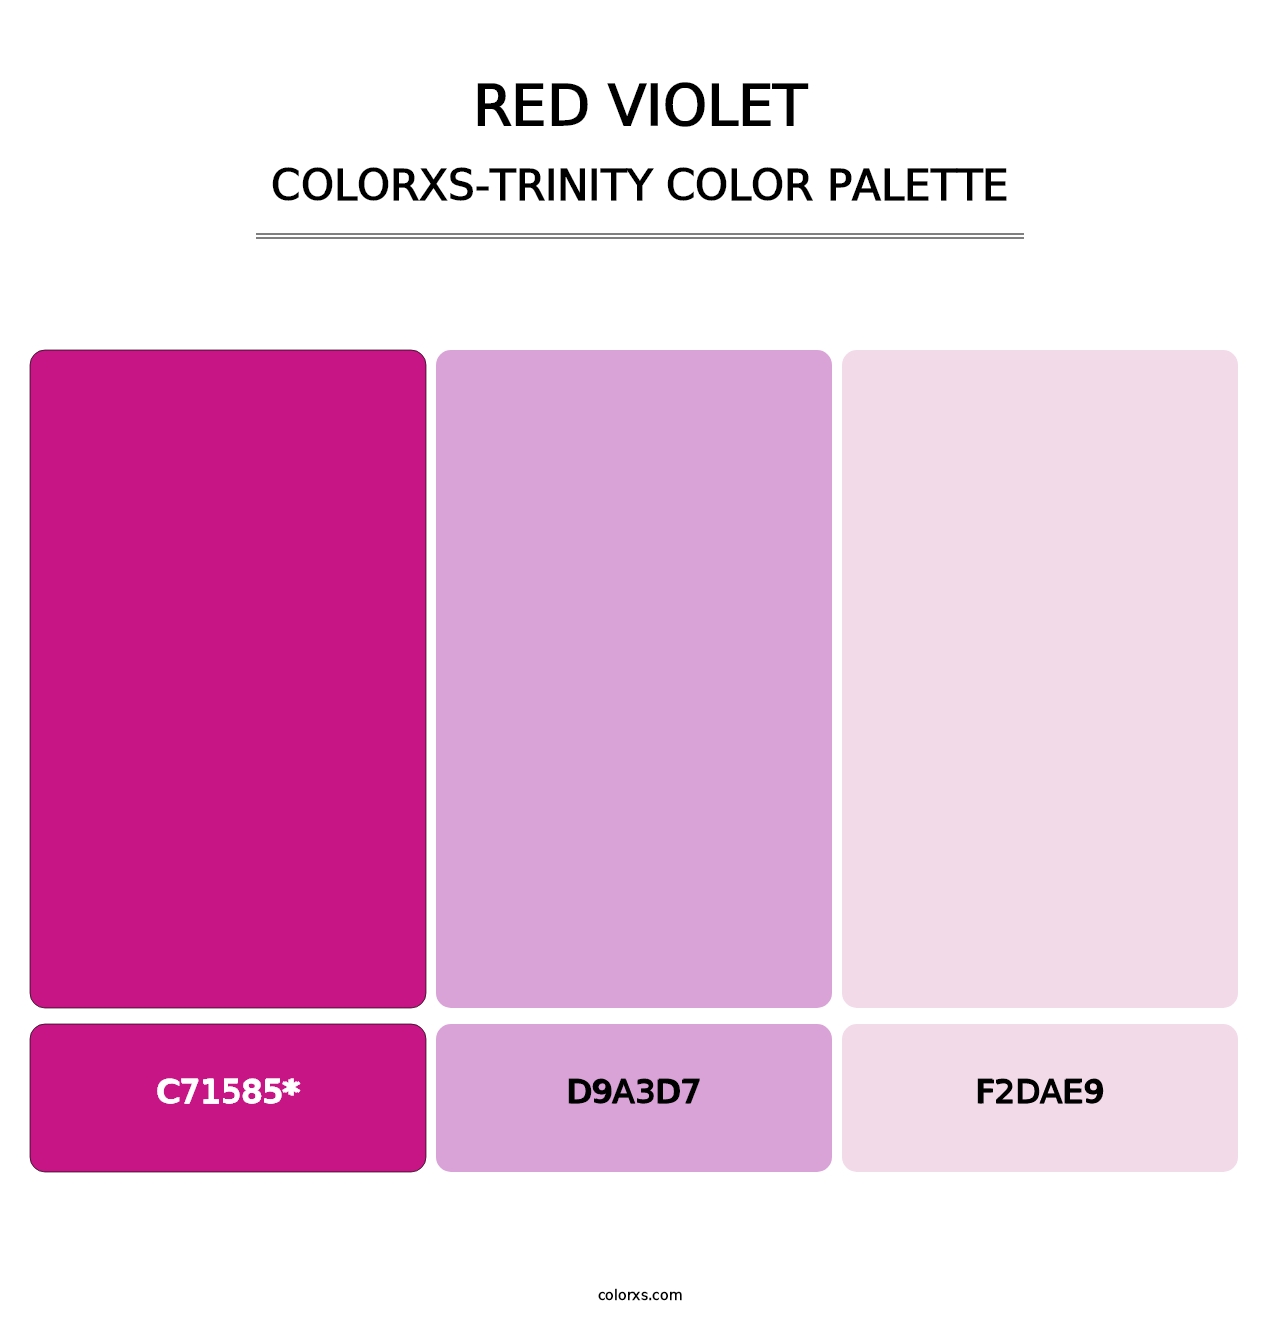 Red Violet - Colorxs Trinity Palette